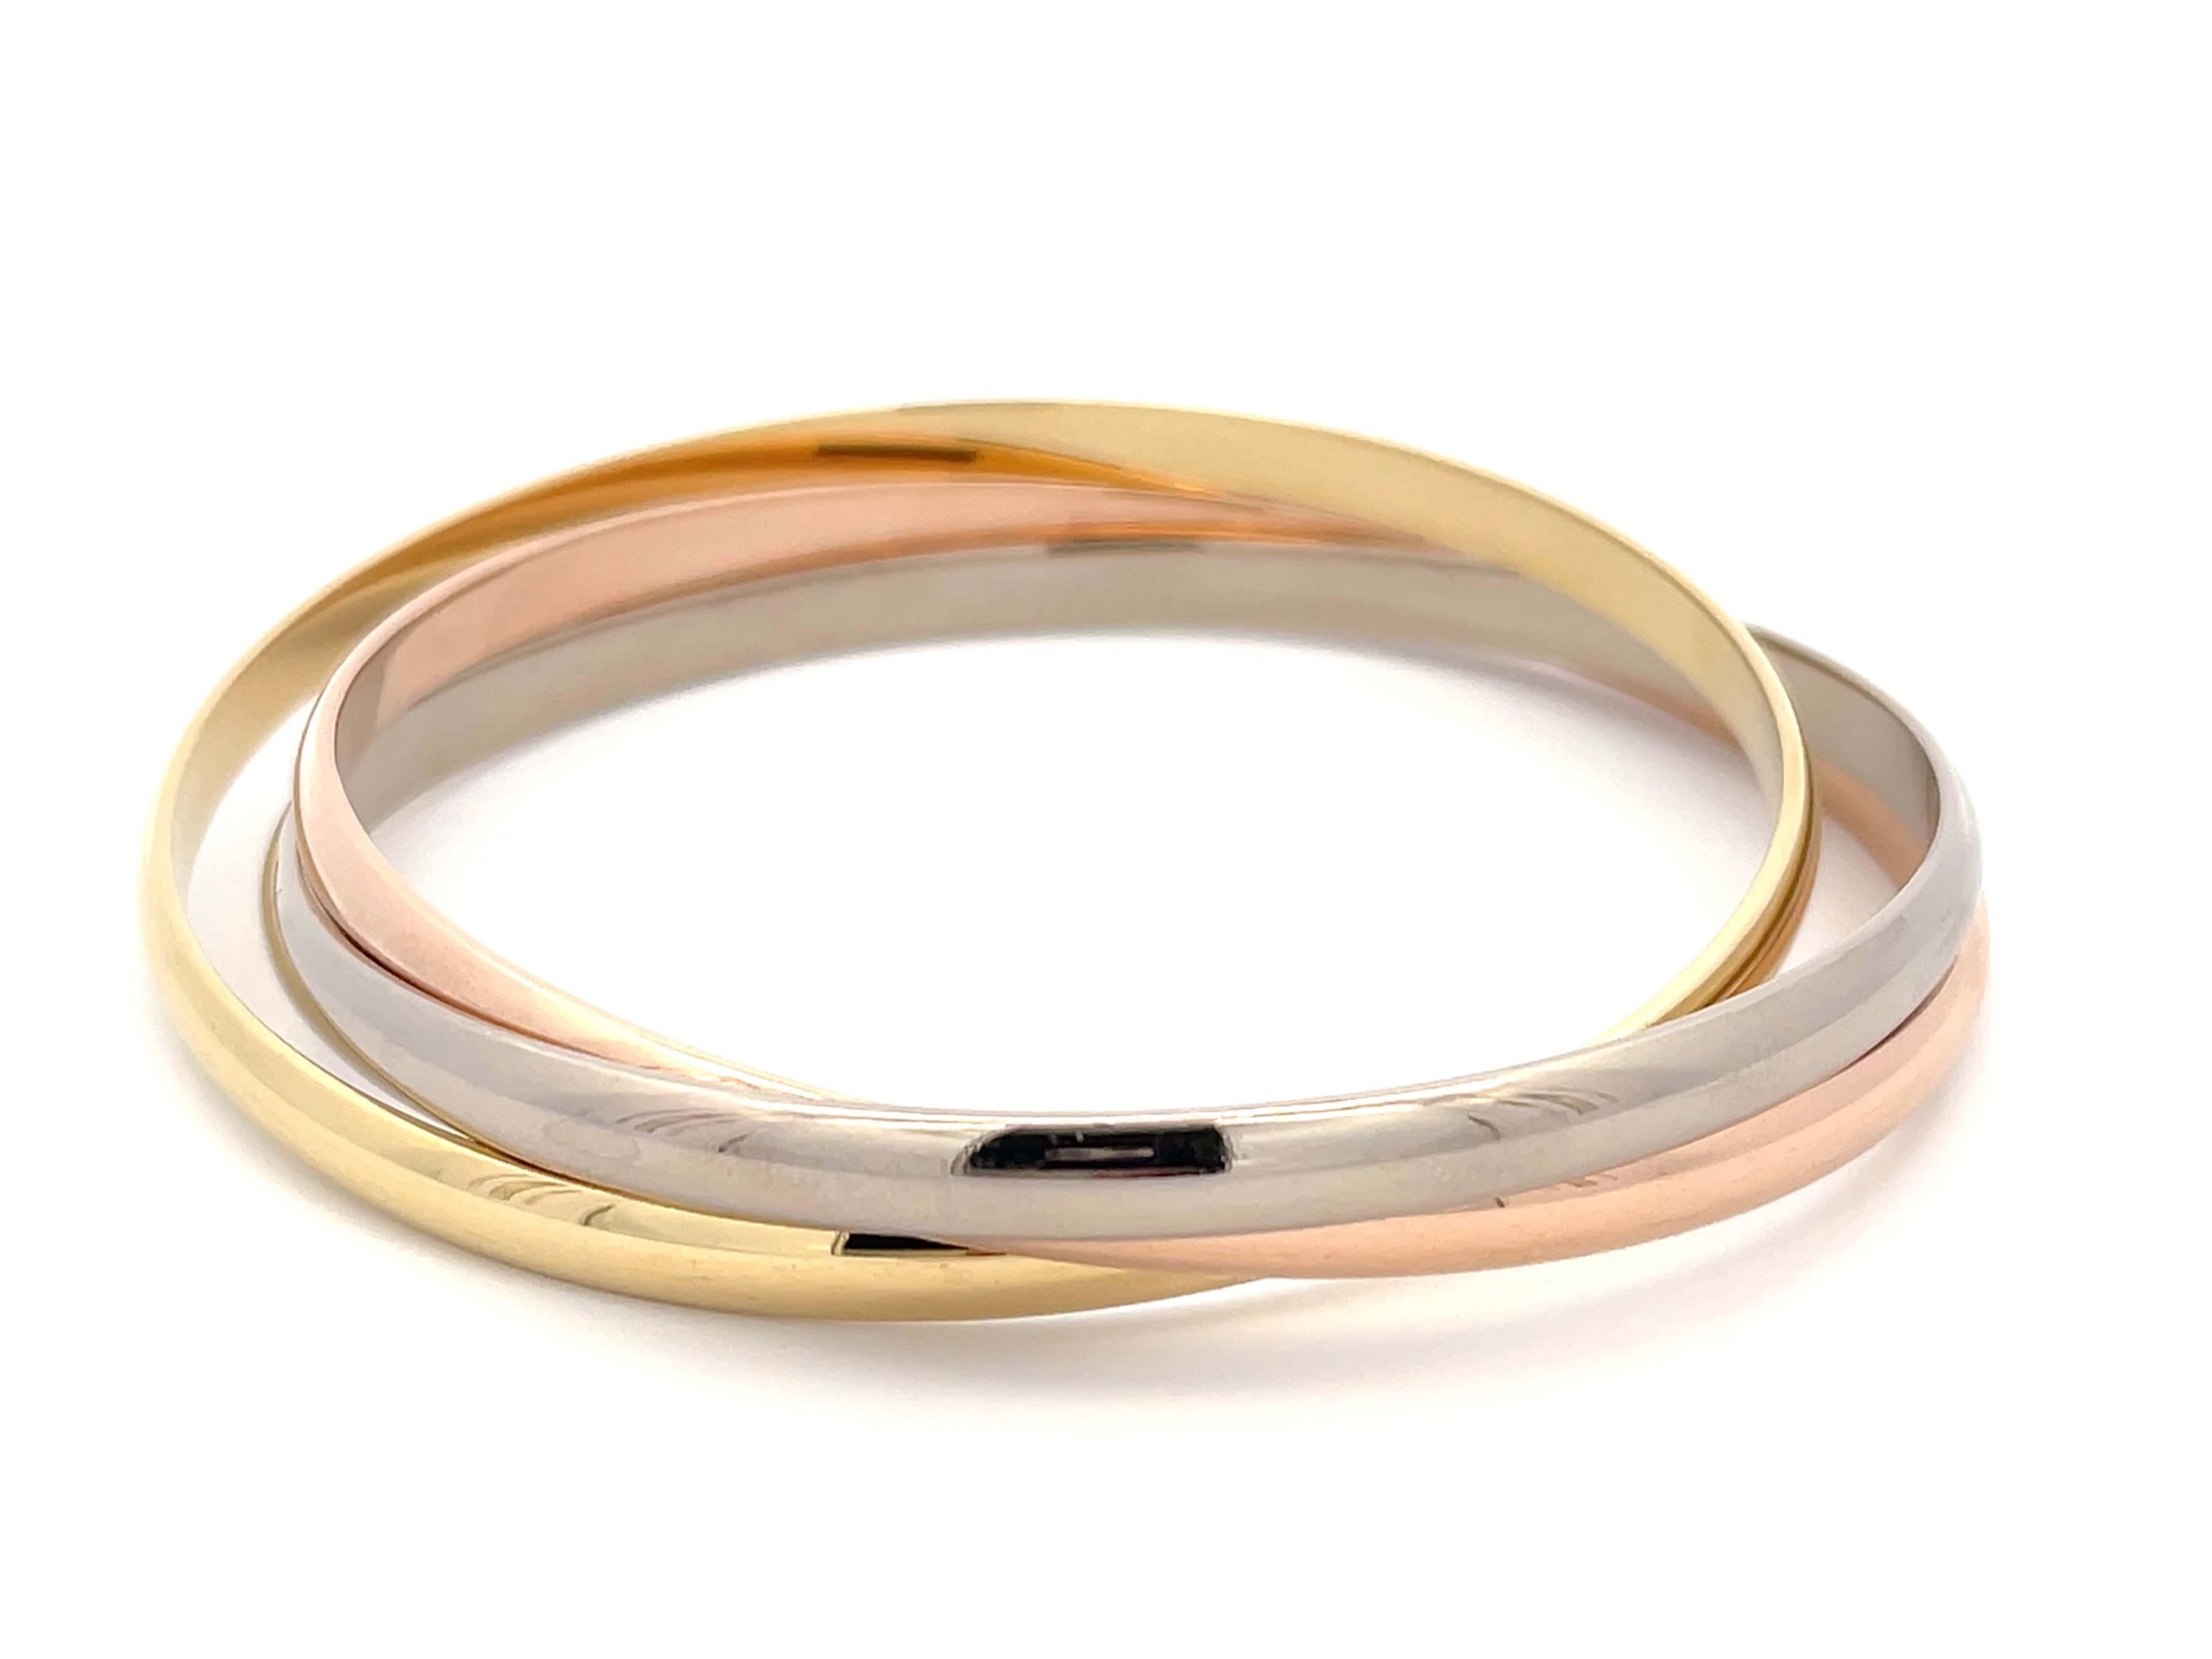 Cartier Trinity Bracelet in 18k White Yellow and Rose Gold In Excellent Condition For Sale In Honolulu, HI